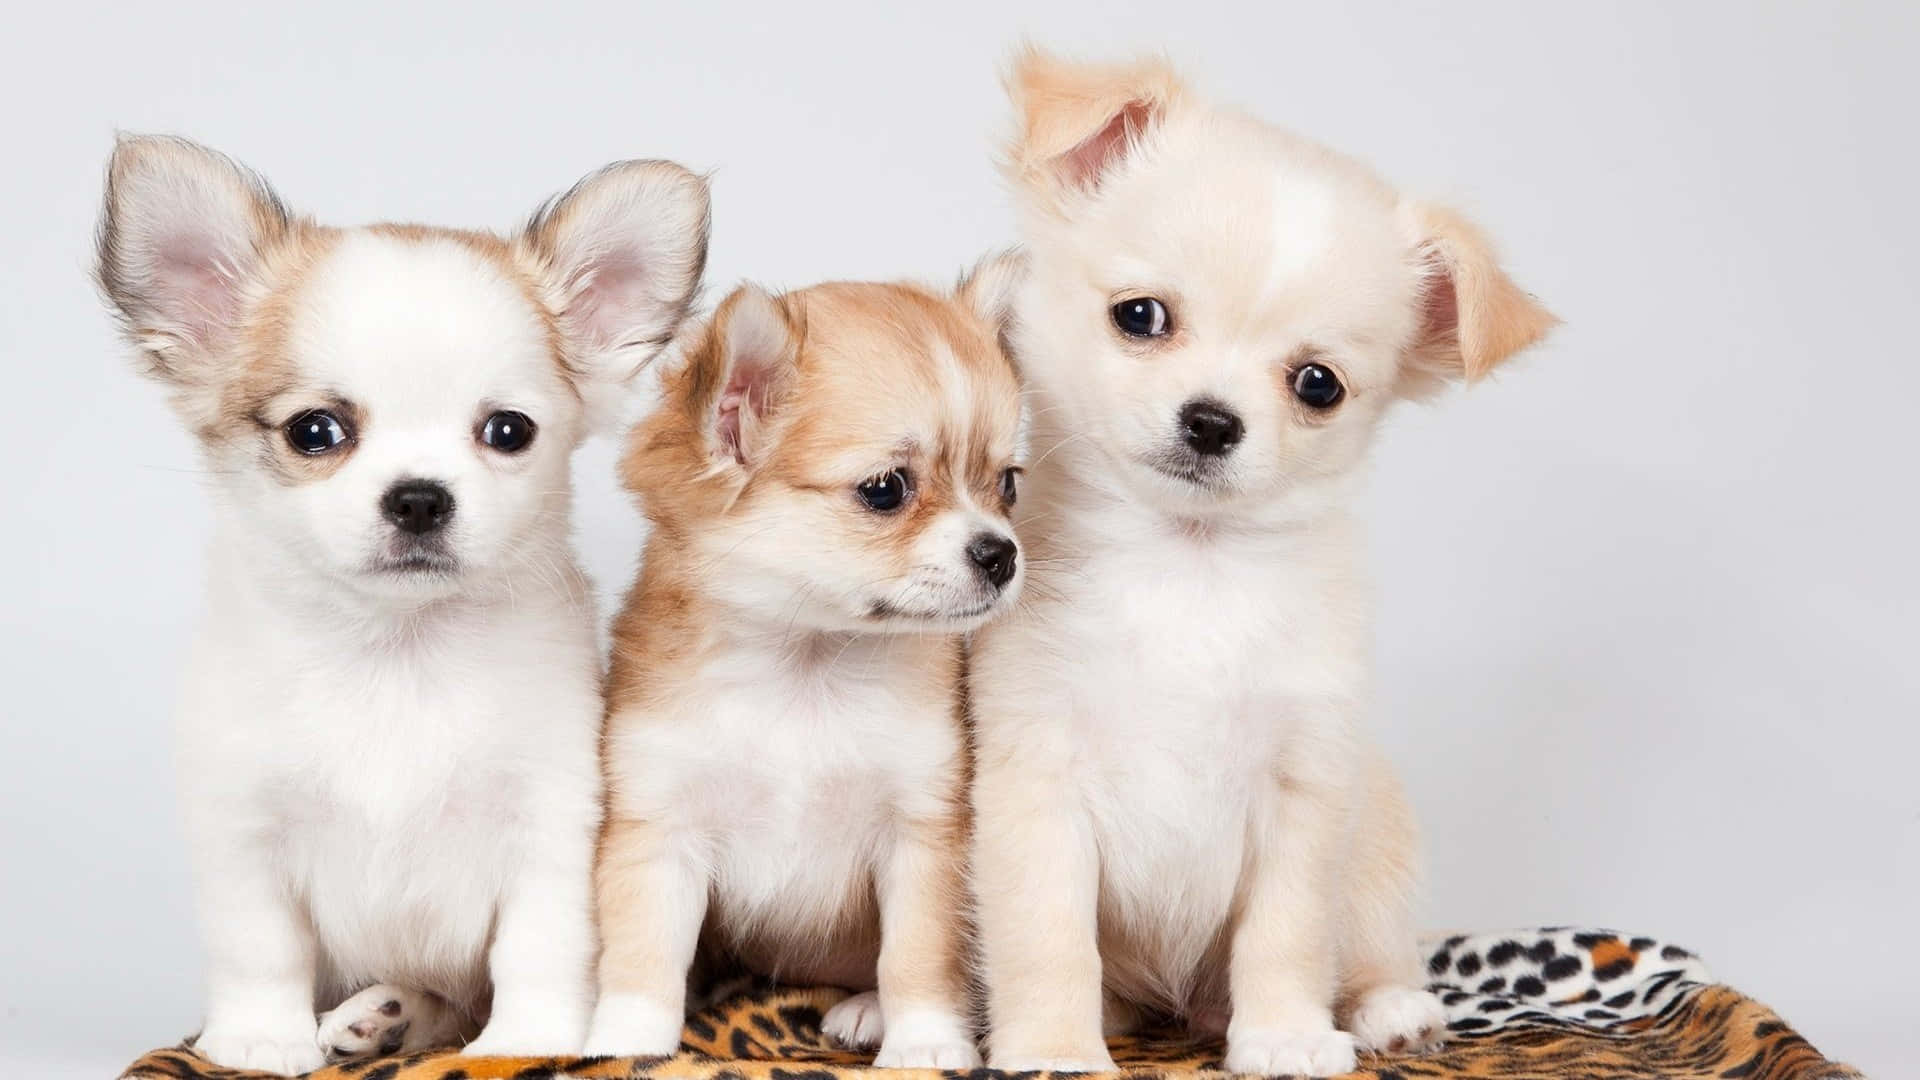 A litter of pink puppies looking for their forever homes. Wallpaper